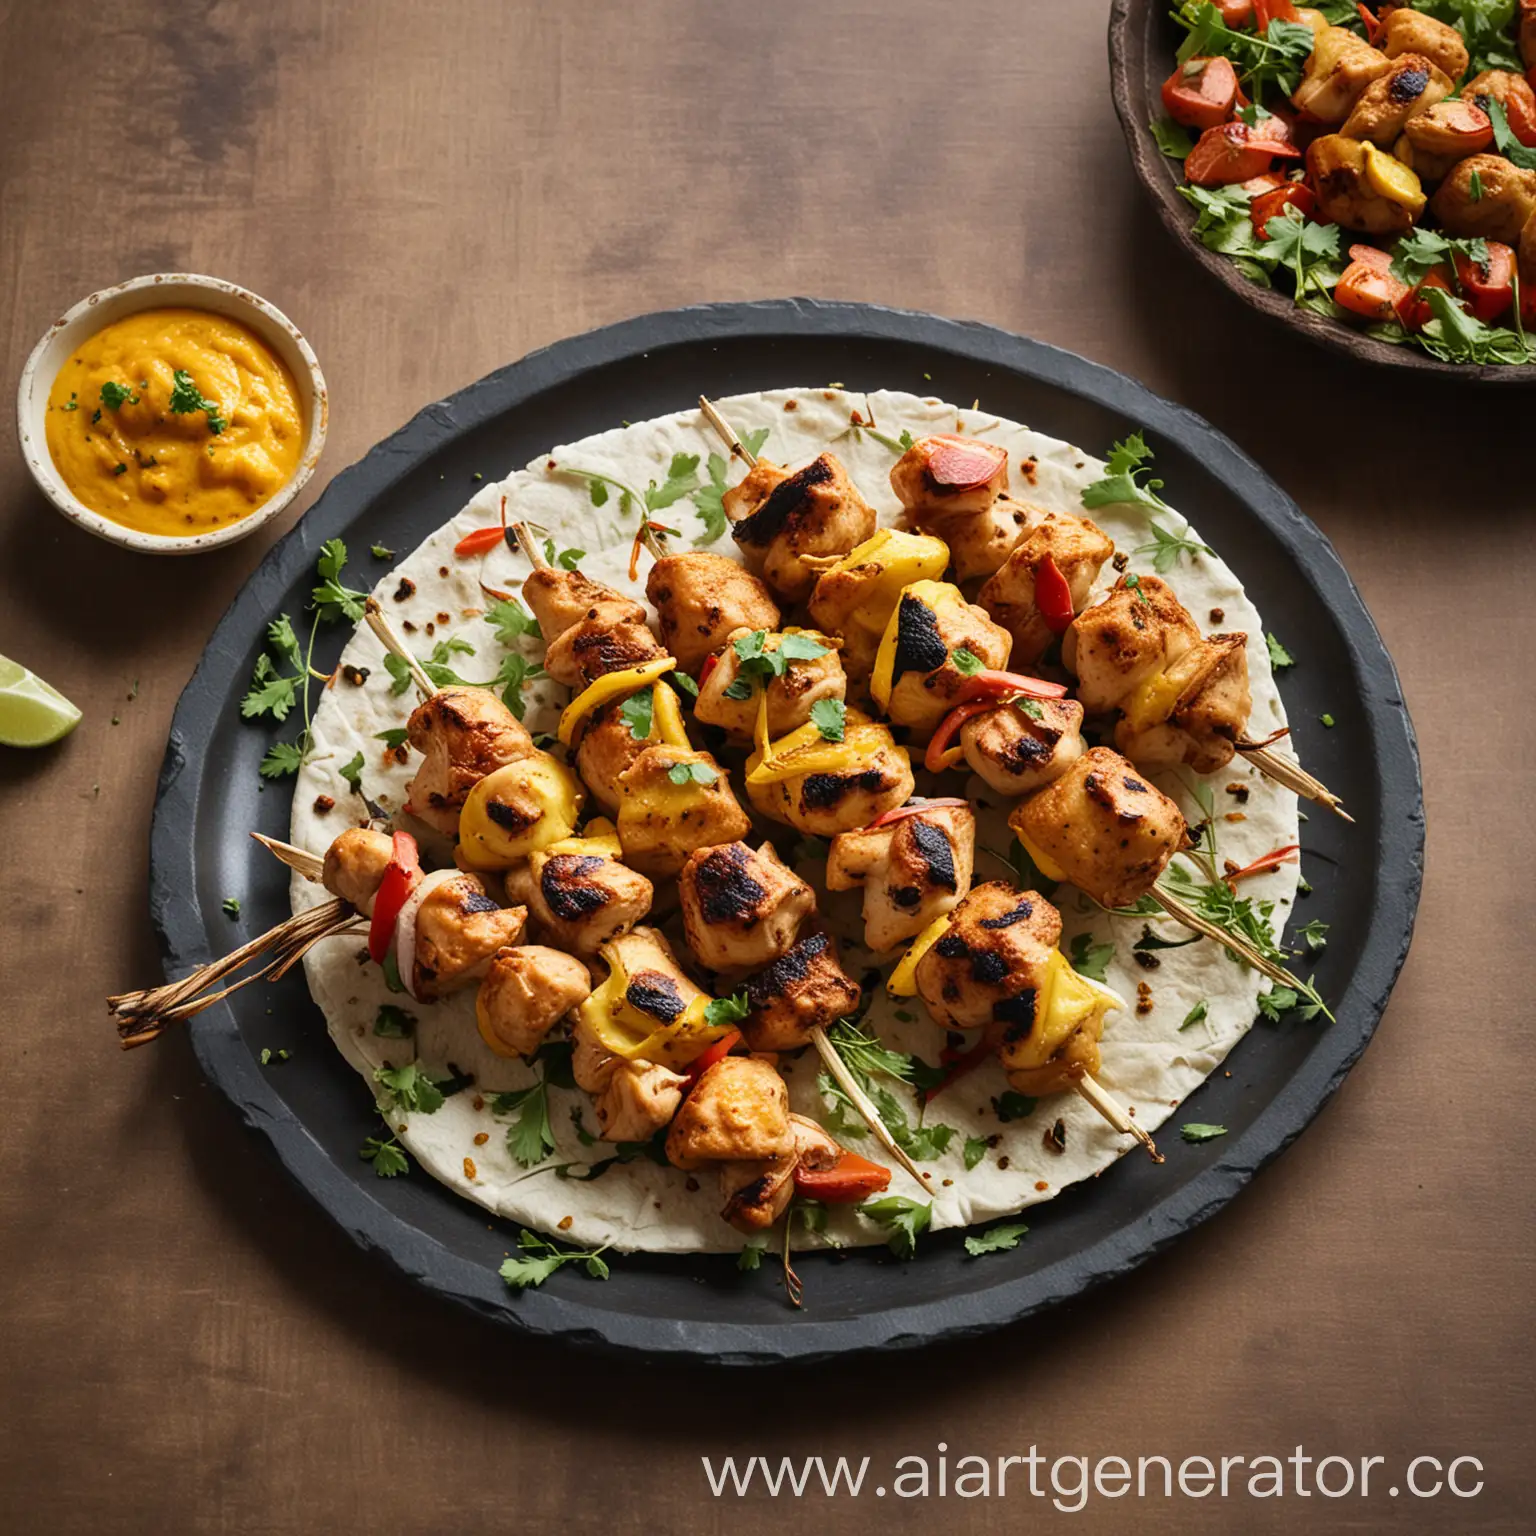 Saffron-Chicken-Kebab-Exquisite-Grilled-Delicacy-Infused-with-Aromatic-Saffron